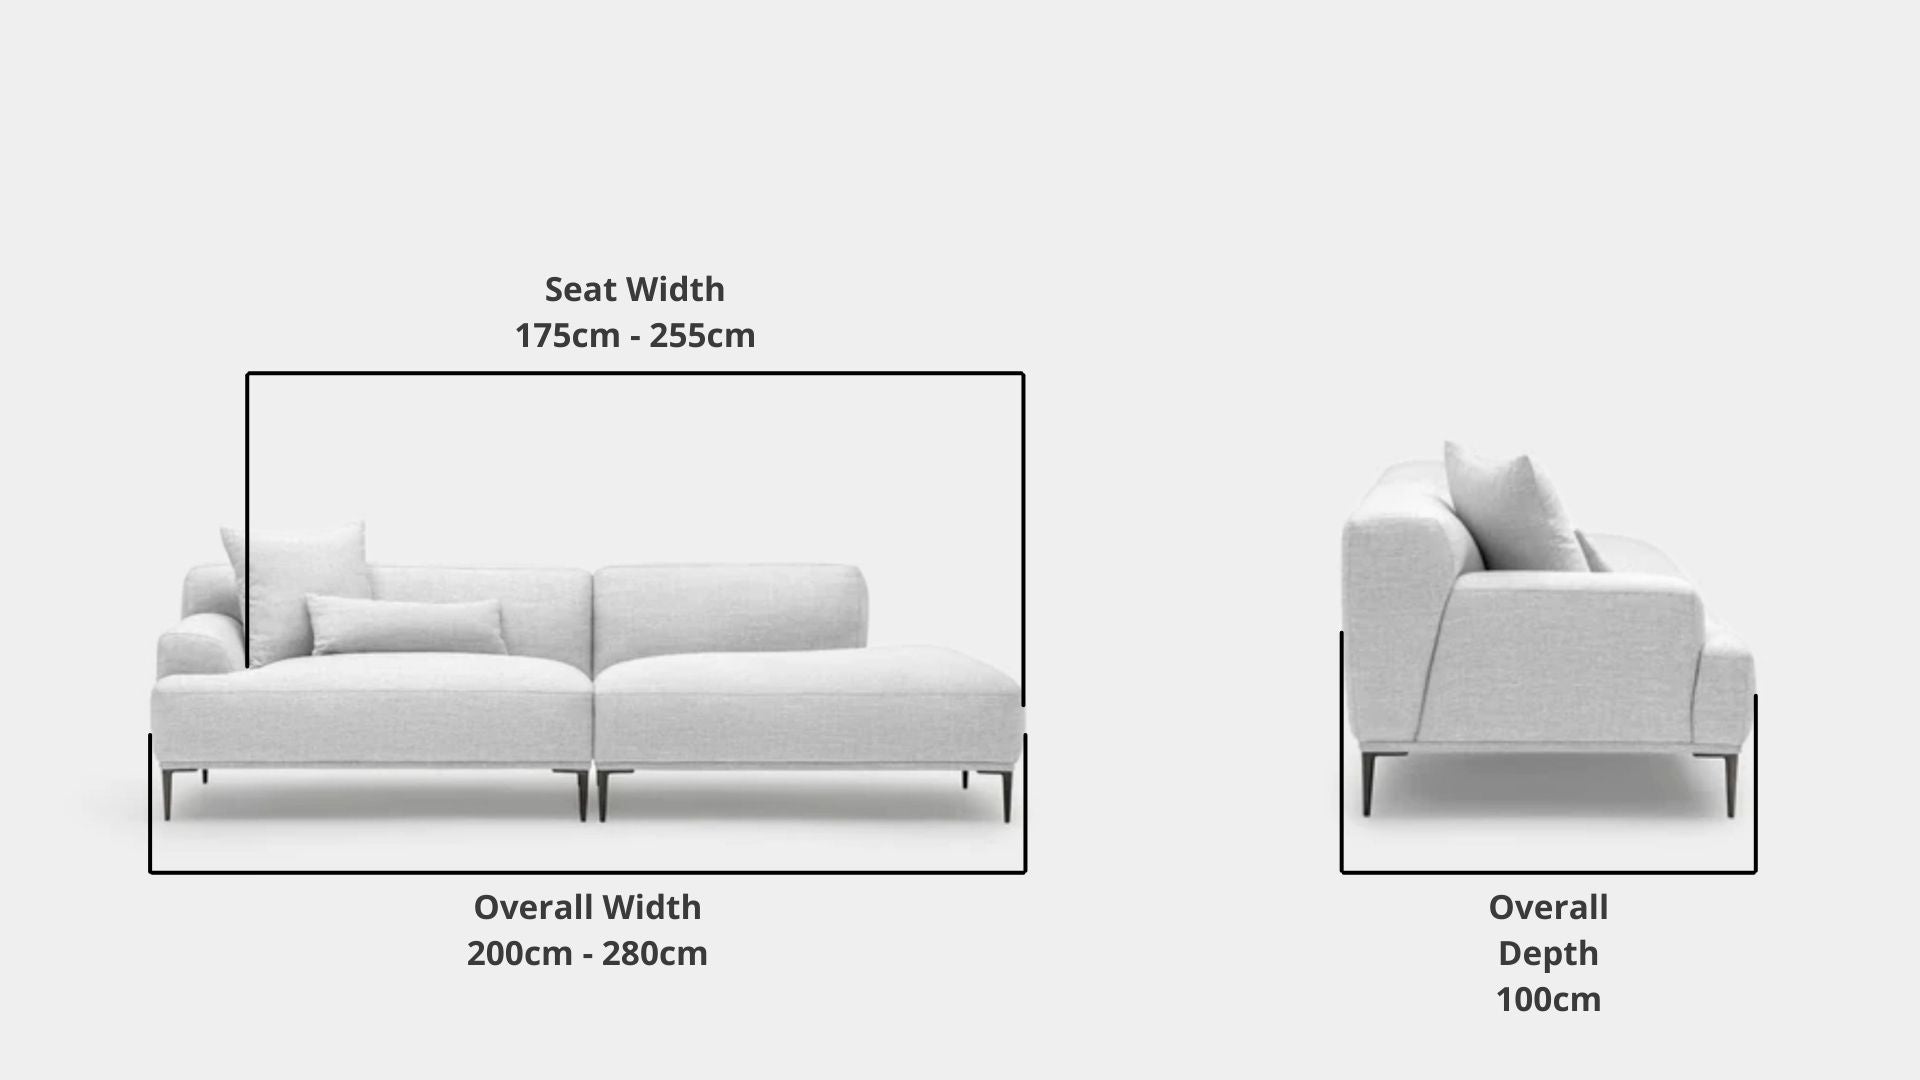 Details the key dimensions in terms of overall width, overall depth and seat width for Crystal Fabric One Arm Sofa